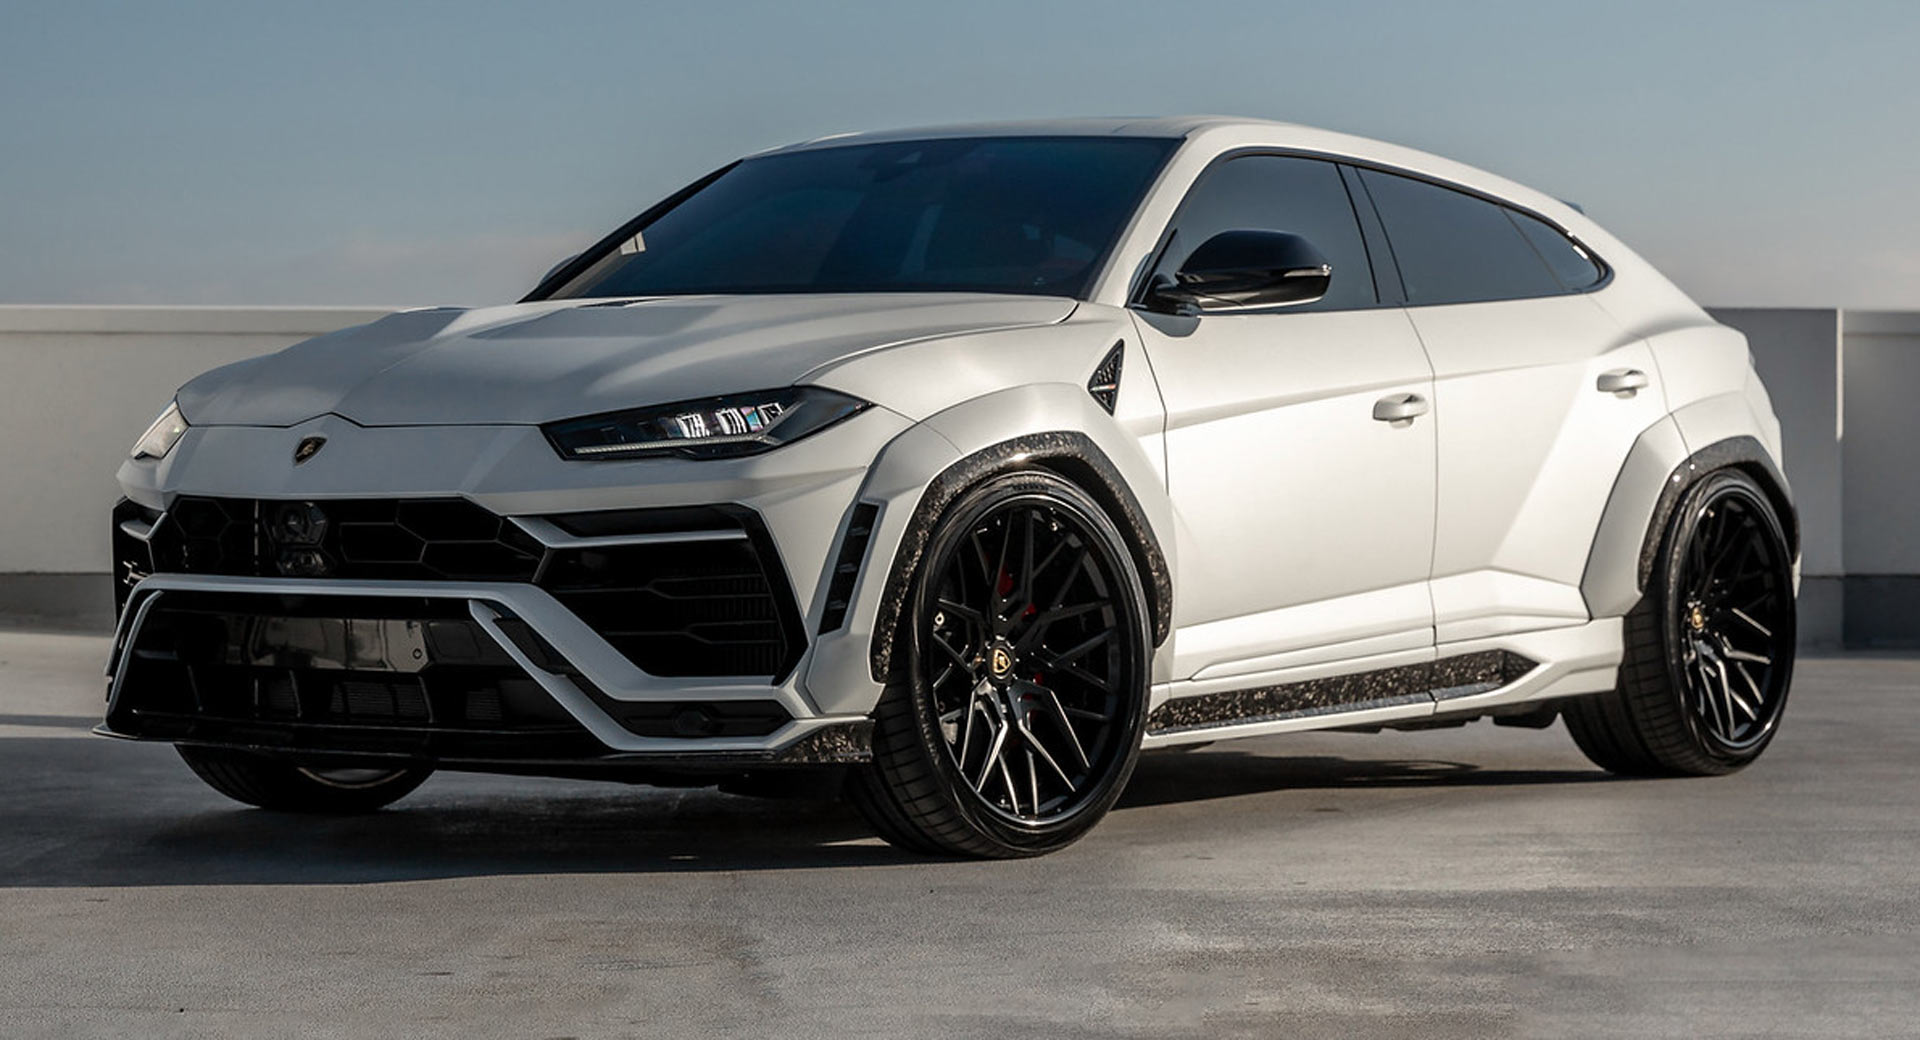 Miami Tuner 1016 Industries Amps Up The Lamborghini Urus Without Affecting  Factory Warranty | Carscoops